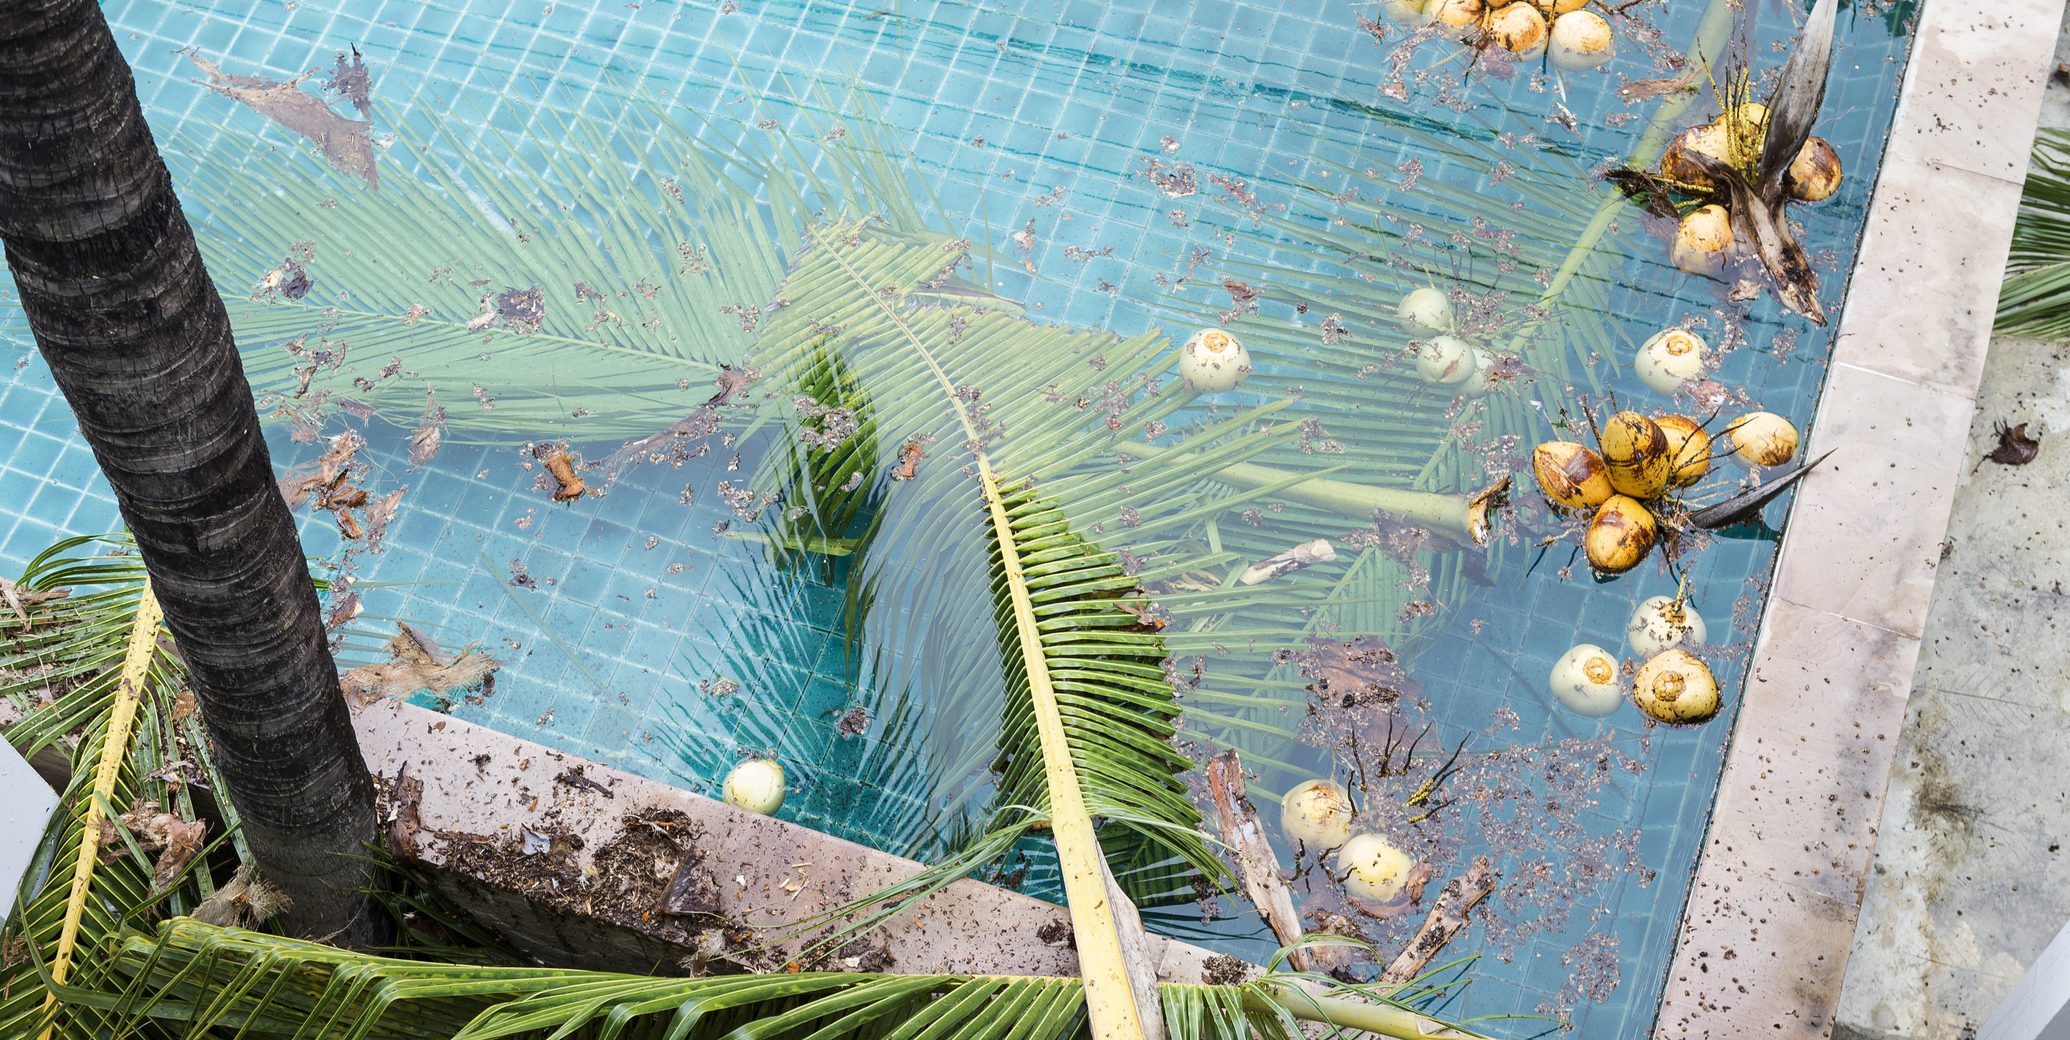 How to Clean Your Pool After a Hurricane